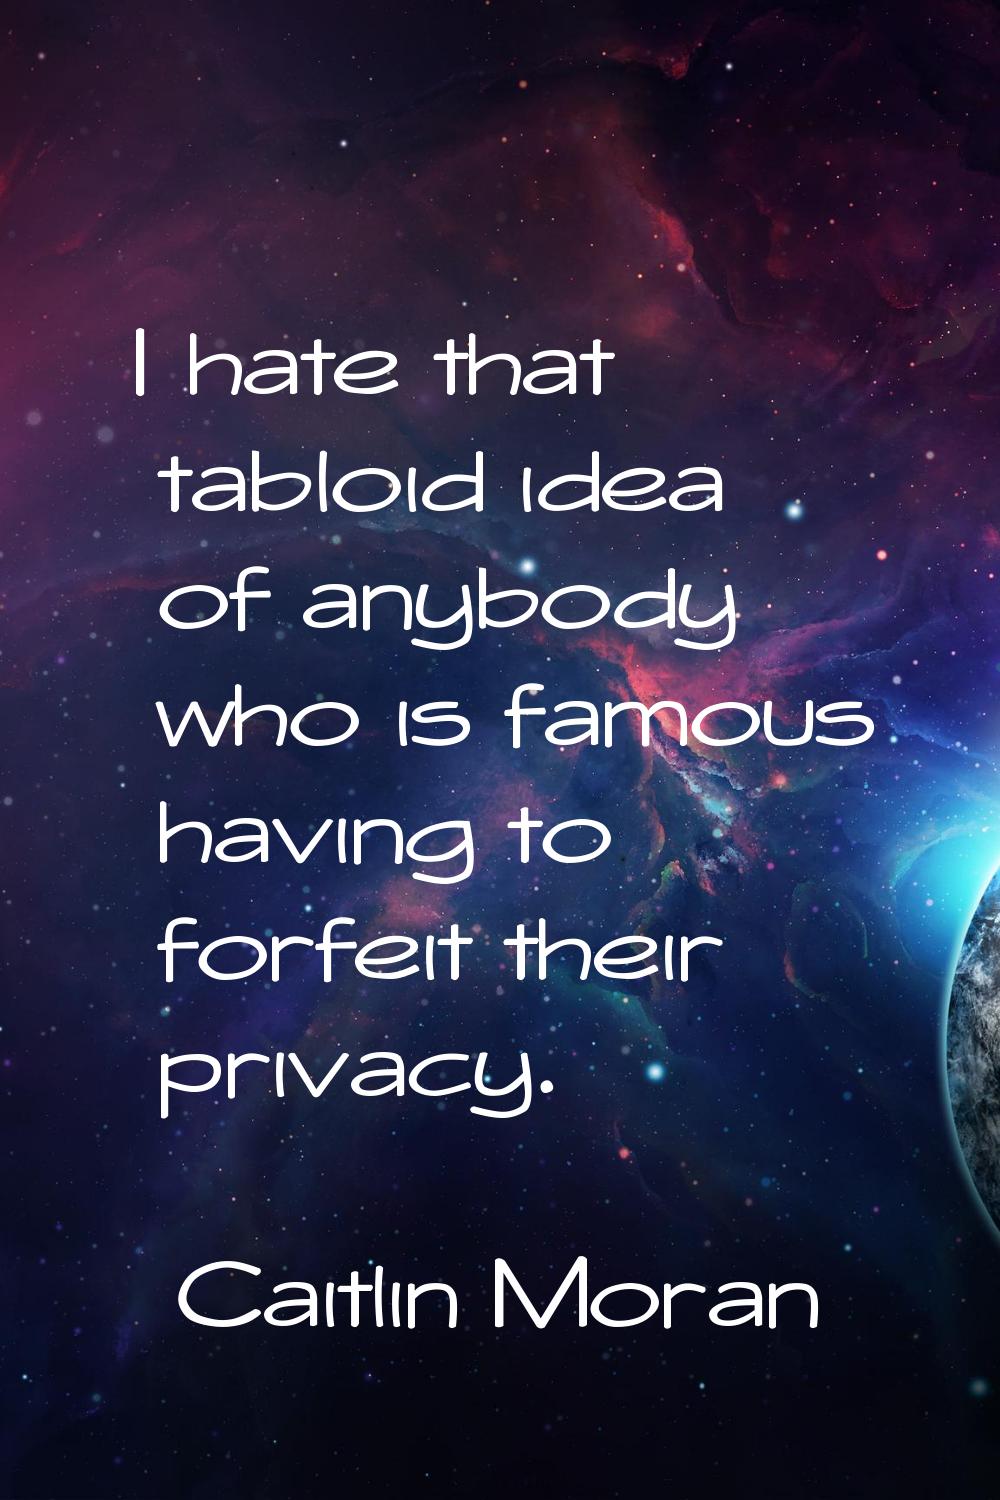 I hate that tabloid idea of anybody who is famous having to forfeit their privacy.